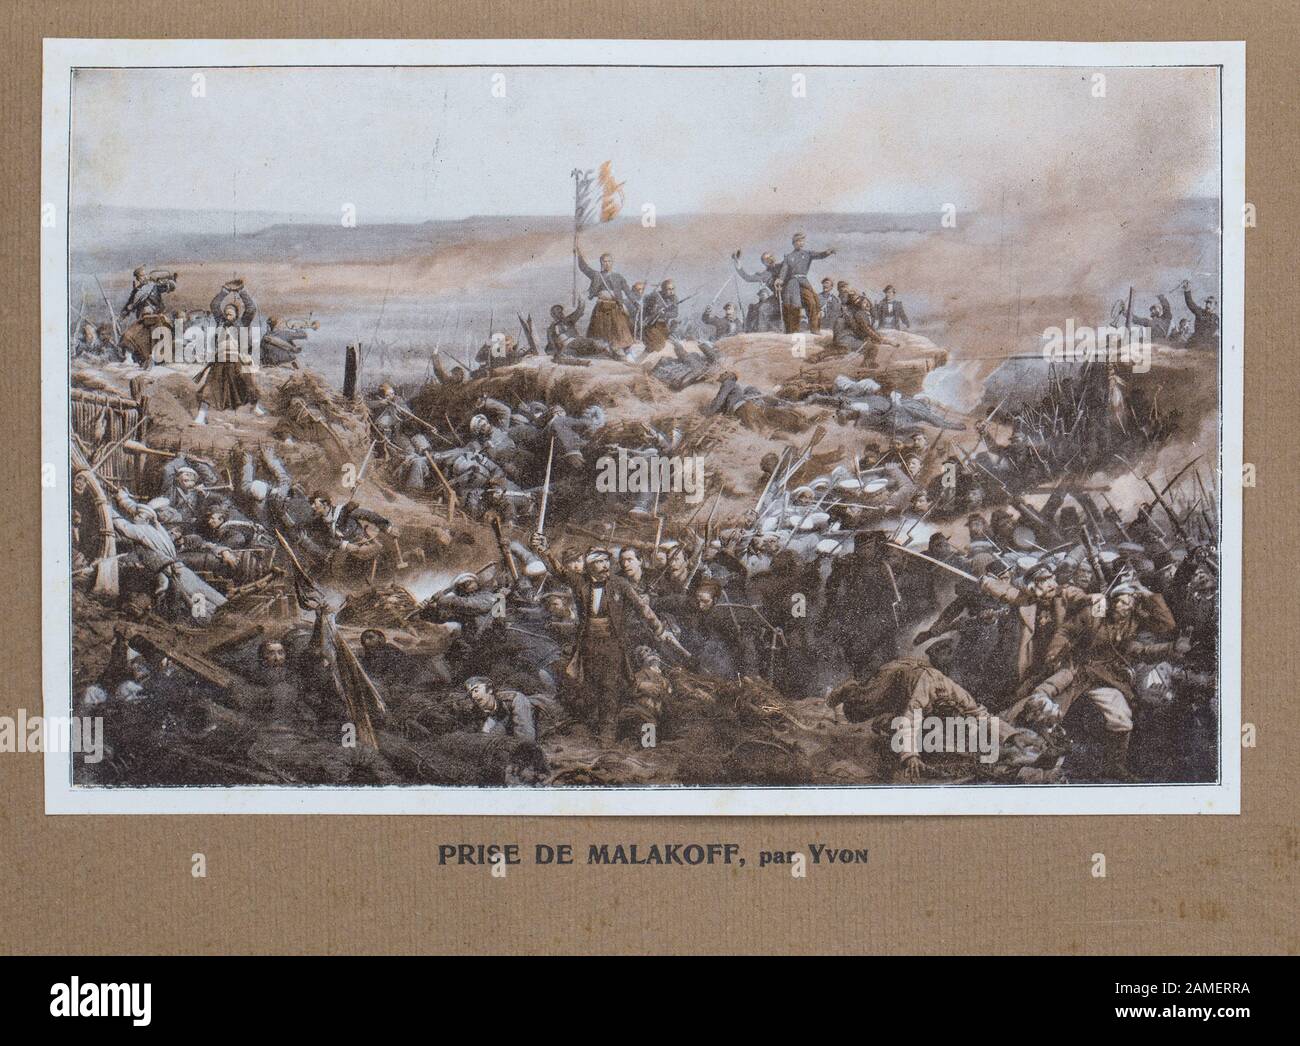 Assault by the French Army on 8 September 1855, resulting in the French capture of the Malakoff fort. Crimean War. Stock Photo